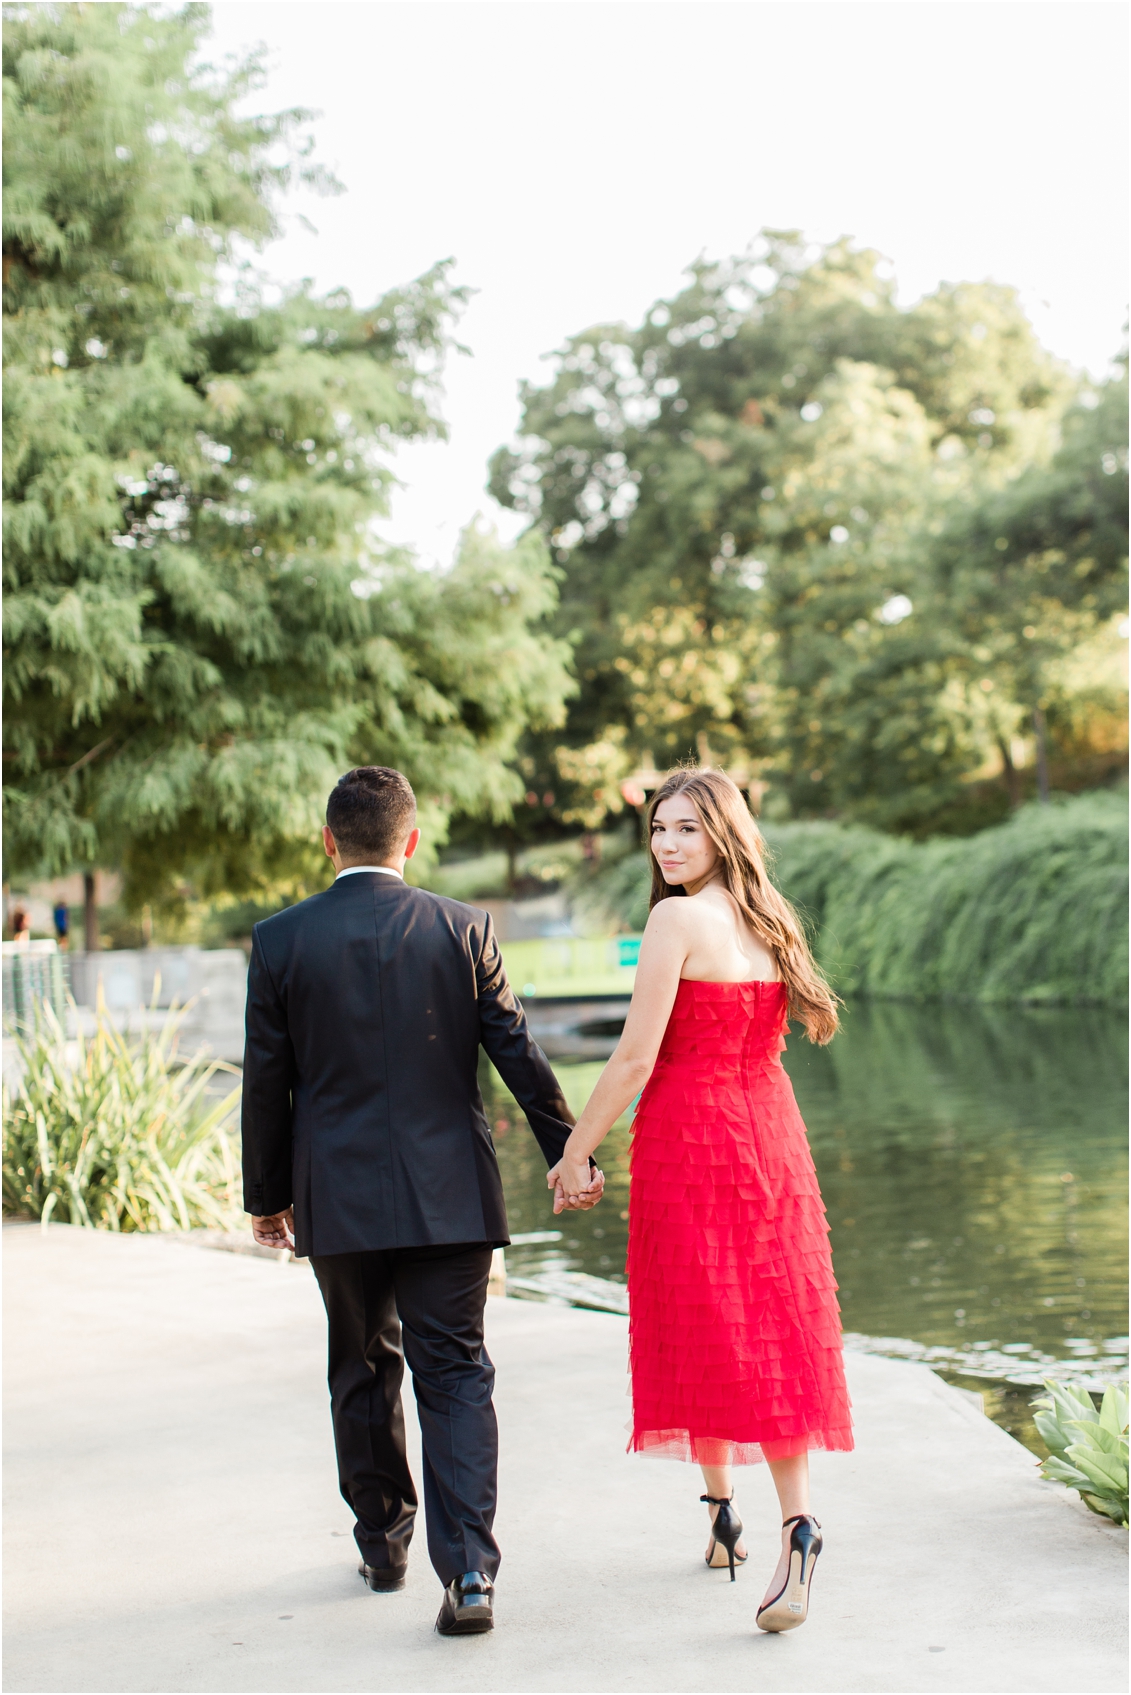 Engagement Session formal outfits